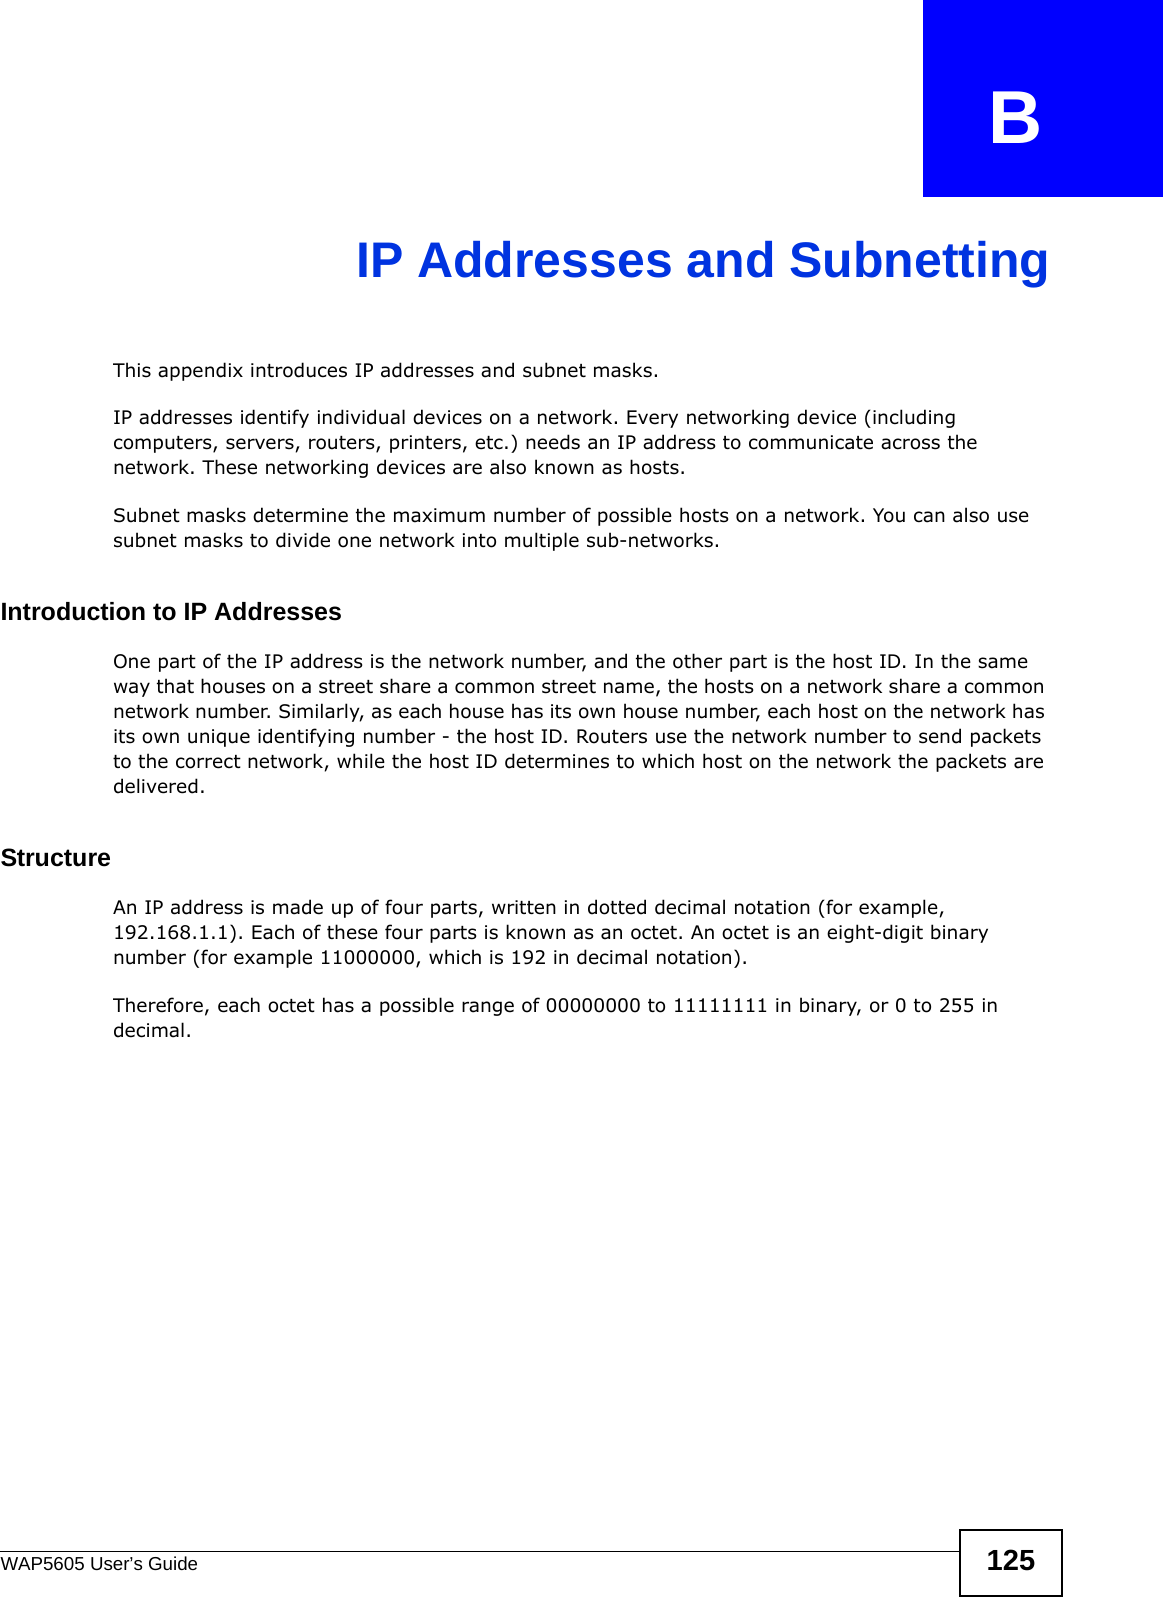 WAP5605 User’s Guide 125APPENDIX   BIP Addresses and SubnettingThis appendix introduces IP addresses and subnet masks. IP addresses identify individual devices on a network. Every networking device (including computers, servers, routers, printers, etc.) needs an IP address to communicate across the network. These networking devices are also known as hosts.Subnet masks determine the maximum number of possible hosts on a network. You can also use subnet masks to divide one network into multiple sub-networks.Introduction to IP AddressesOne part of the IP address is the network number, and the other part is the host ID. In the same way that houses on a street share a common street name, the hosts on a network share a common network number. Similarly, as each house has its own house number, each host on the network has its own unique identifying number - the host ID. Routers use the network number to send packets to the correct network, while the host ID determines to which host on the network the packets are delivered.StructureAn IP address is made up of four parts, written in dotted decimal notation (for example, 192.168.1.1). Each of these four parts is known as an octet. An octet is an eight-digit binary number (for example 11000000, which is 192 in decimal notation). Therefore, each octet has a possible range of 00000000 to 11111111 in binary, or 0 to 255 in decimal.